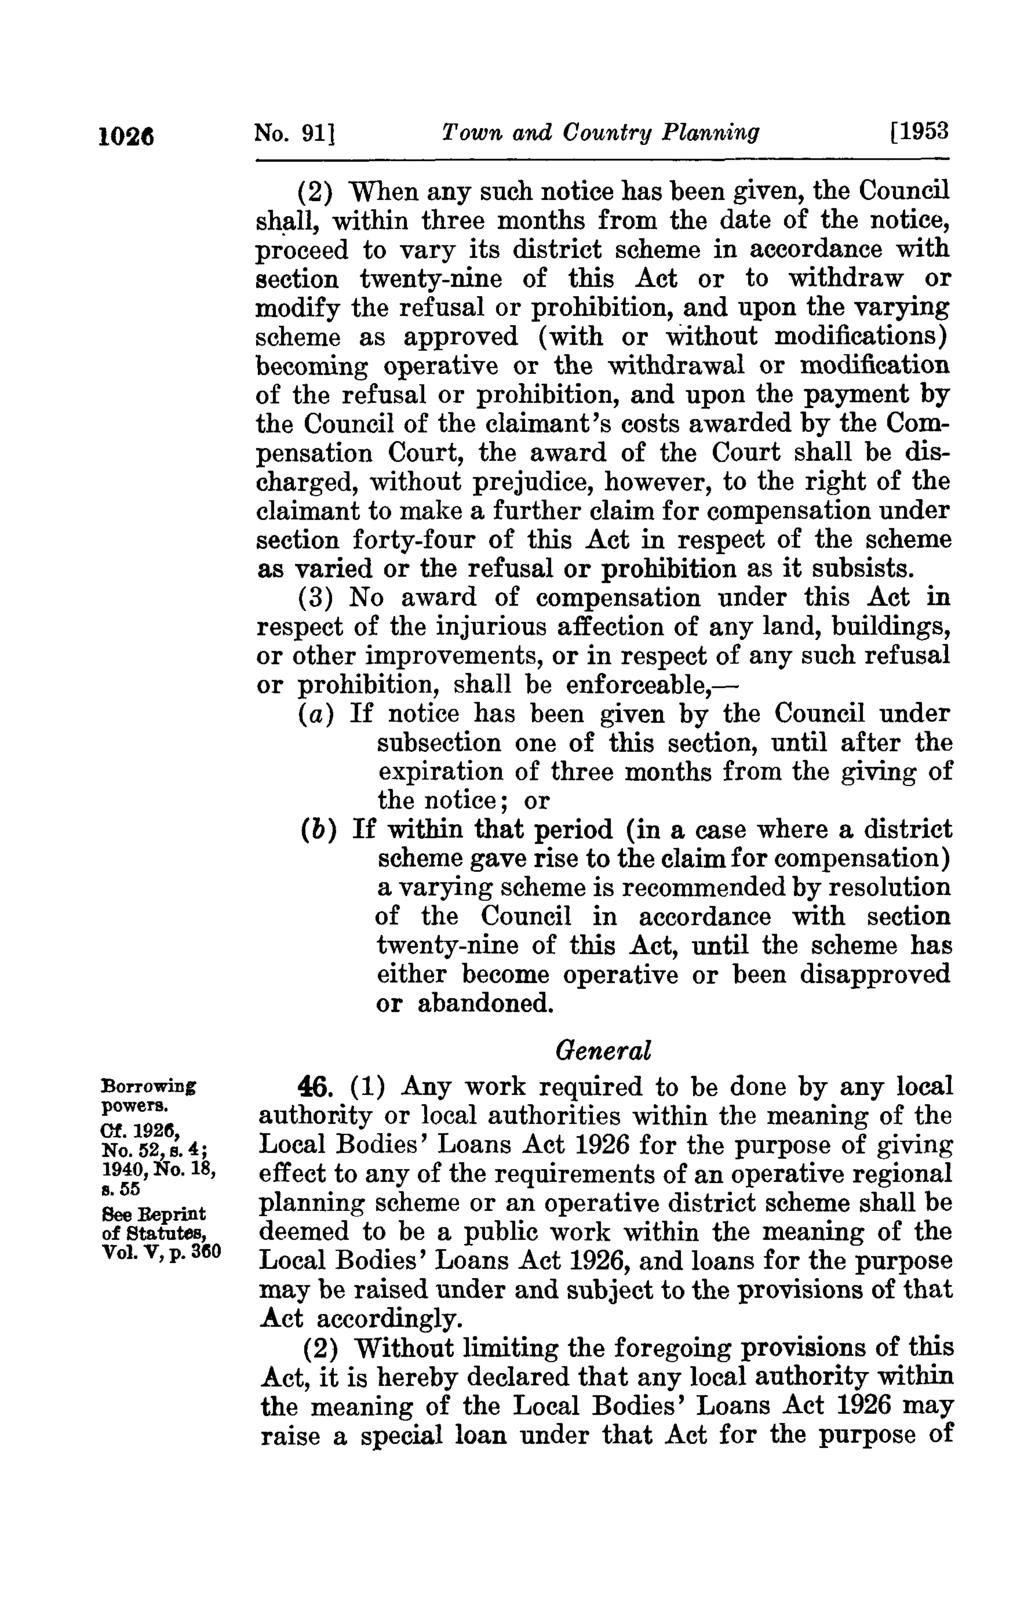 No. 91] Town and Country Planning [1953 Borrowing powers. Of. 19211, No. 52,s.4; 1940, No. 18, 8.55 Bee Reprint of Statutes, Vol. V, p.